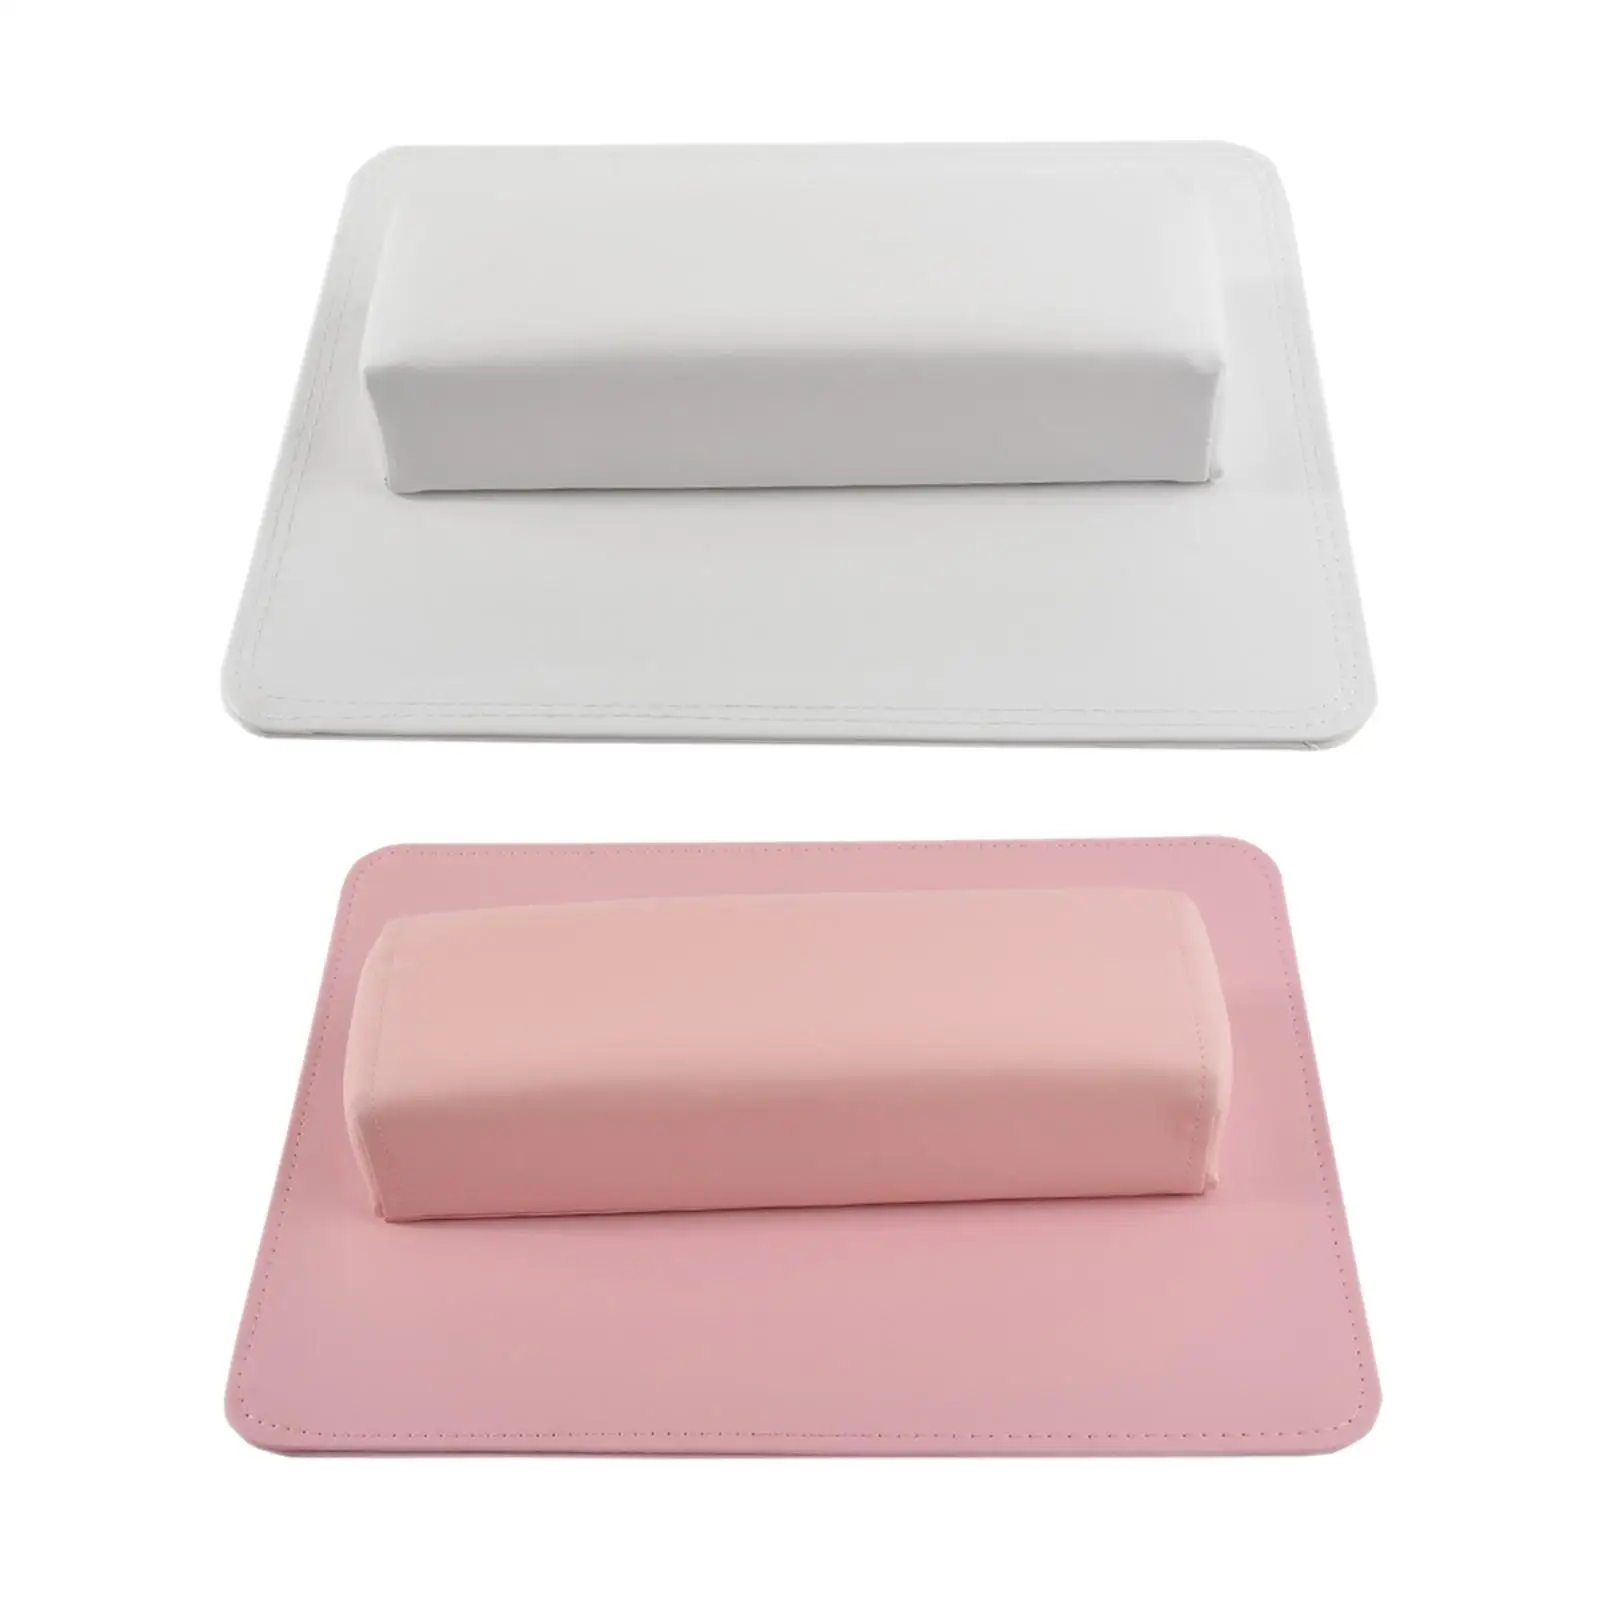 Nail Hand Pillow and Mat Set/ Nail Hand Rest Holder/ Comfortable PU Leather/ Wrist Arm Pad/ Manicure Tool for Home Salon